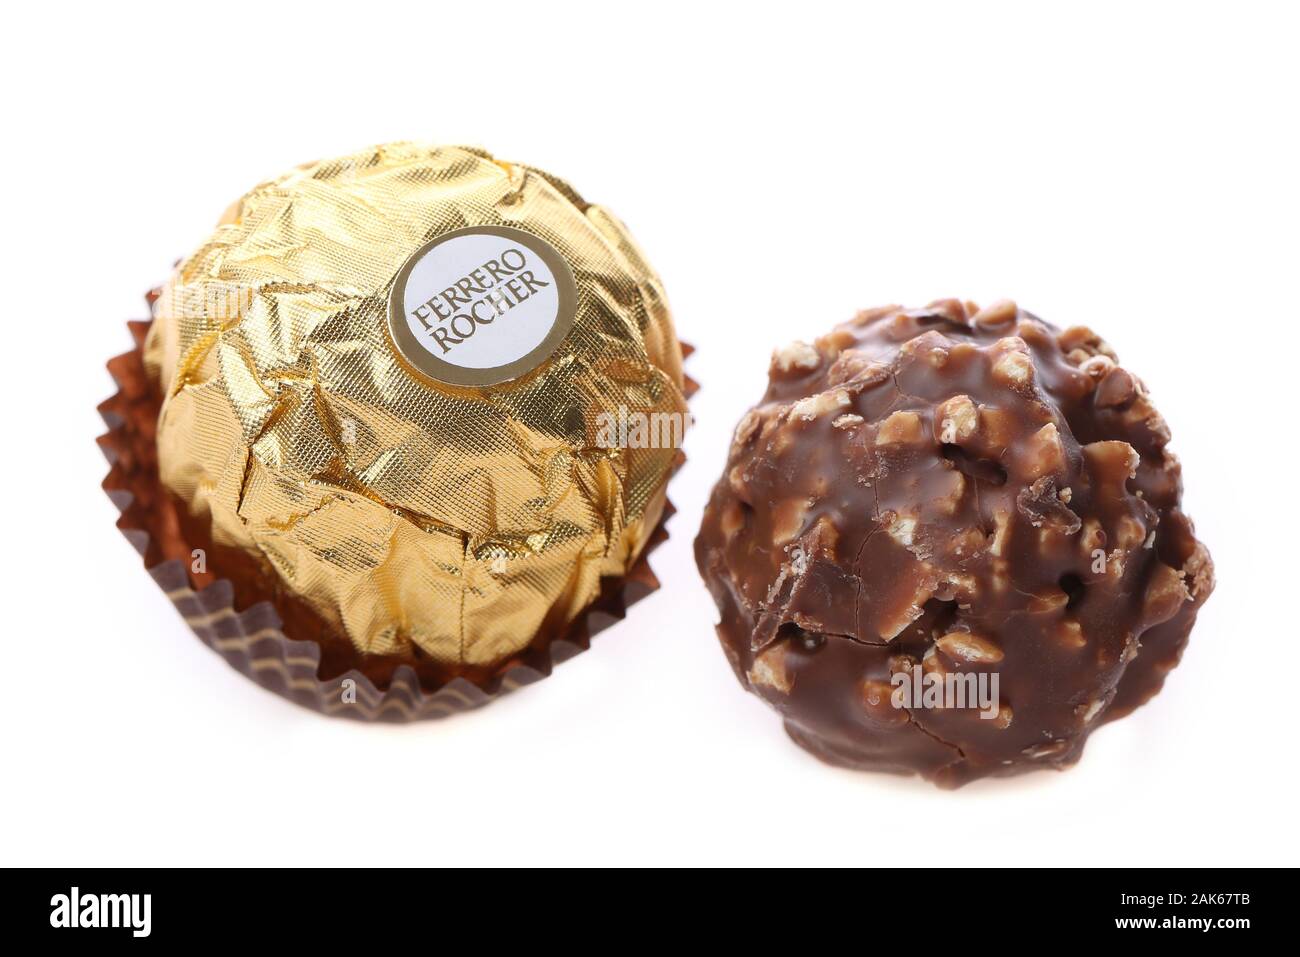 Ferrero Rocher chocolates were inspired by the Virgin Mary